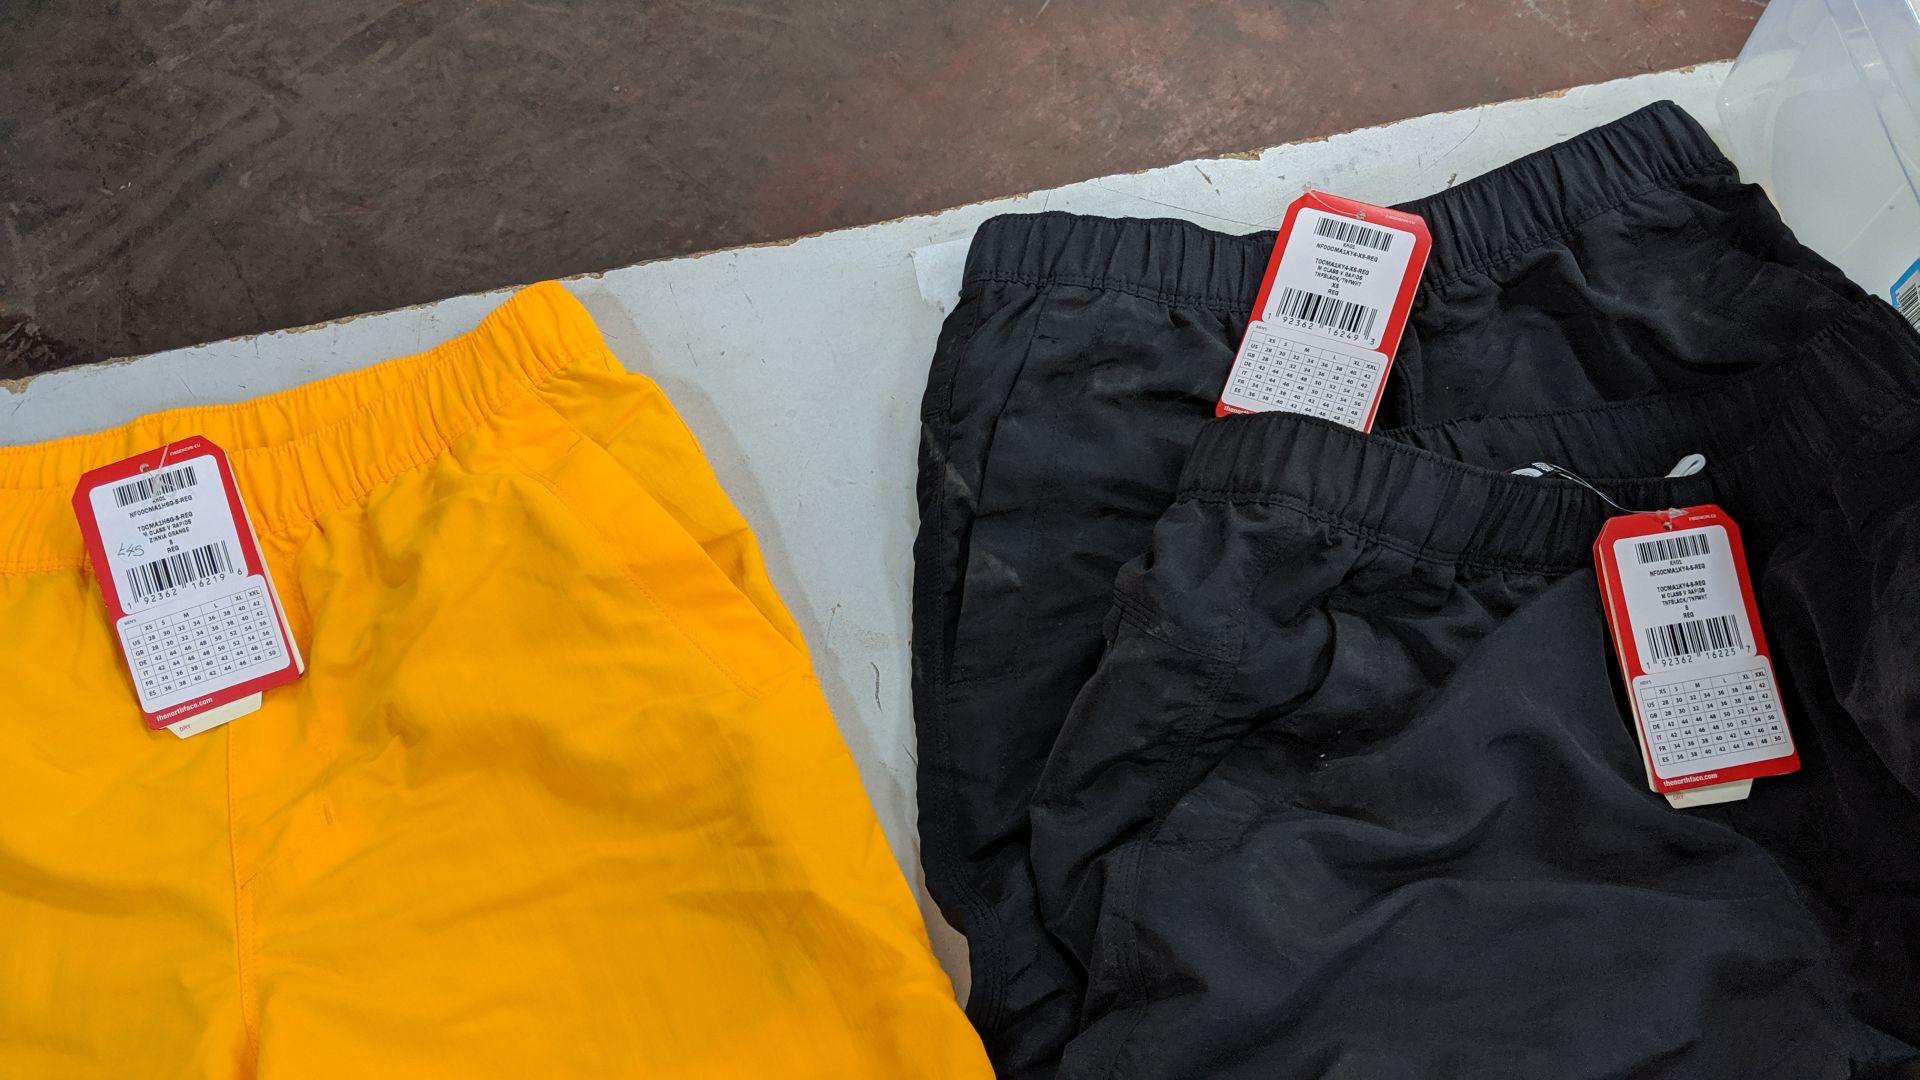 6 off shorts & swim shorts by North Face, Napapijri, Tuk Tuk & others. This is one of a number of - Image 6 of 6